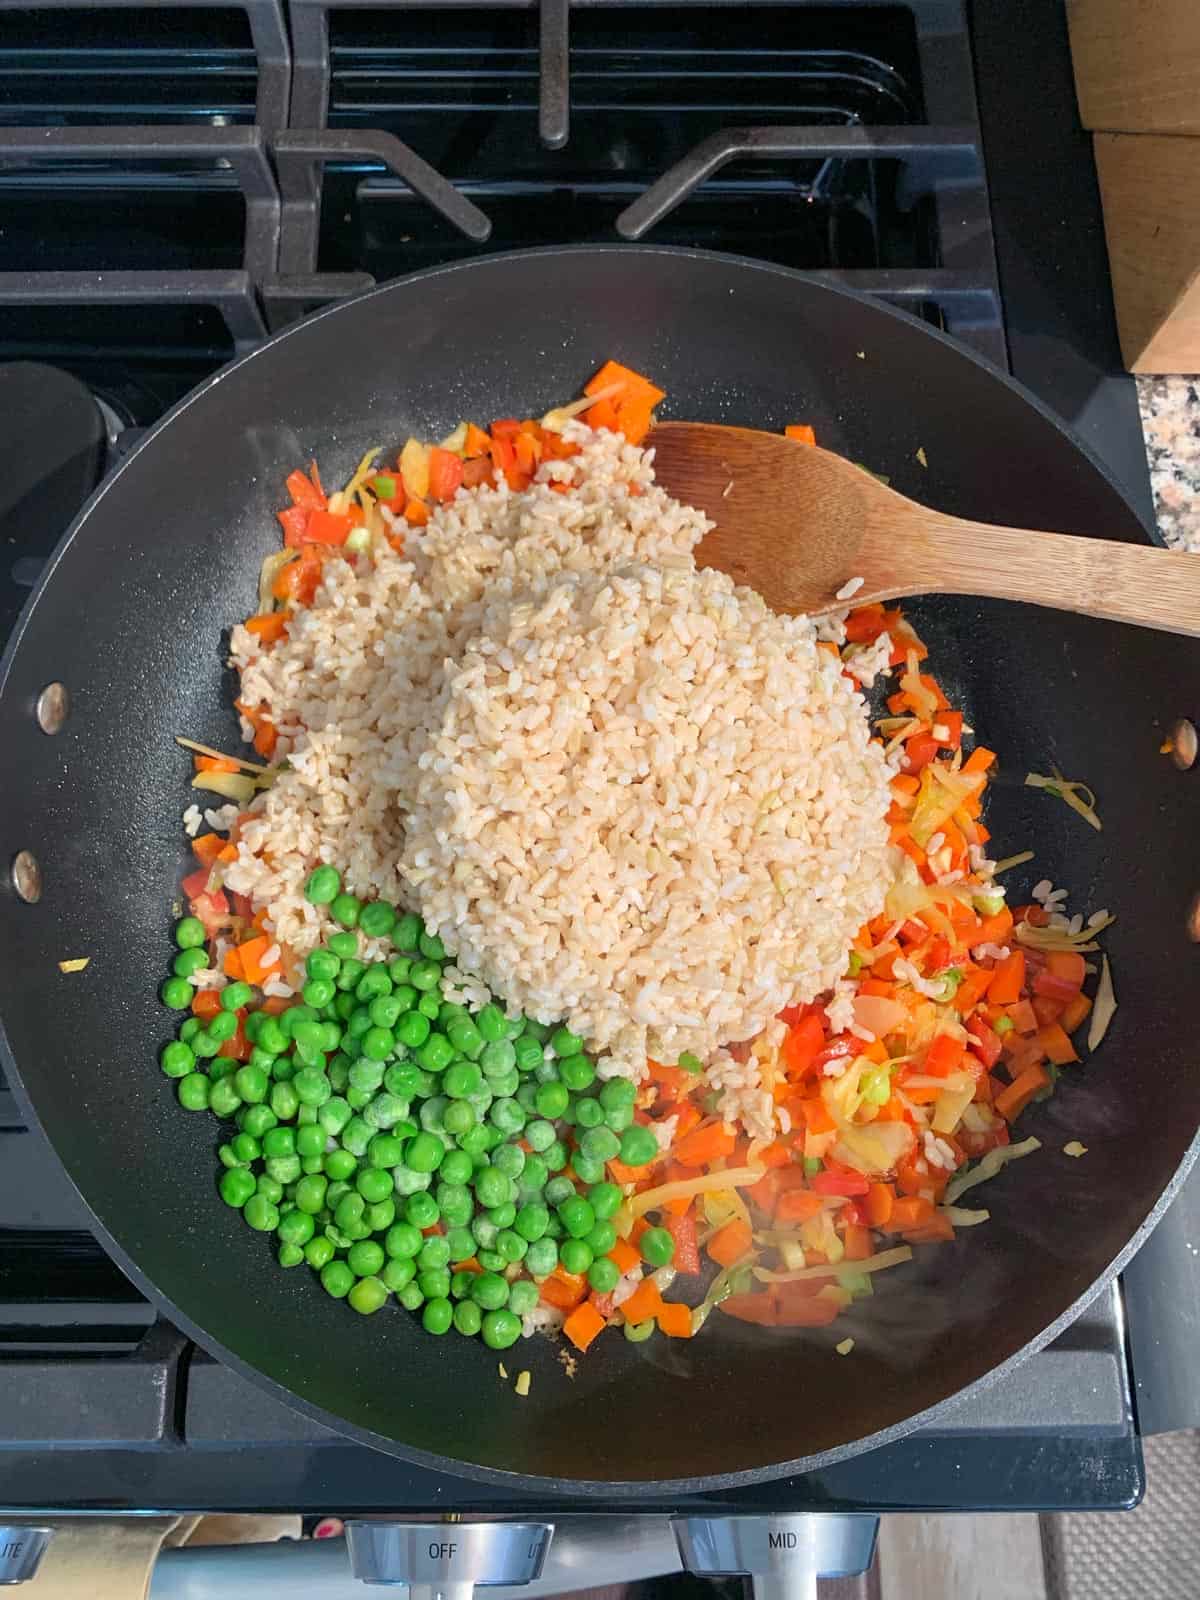 Adding rice, peas, and sauce to the skillet.